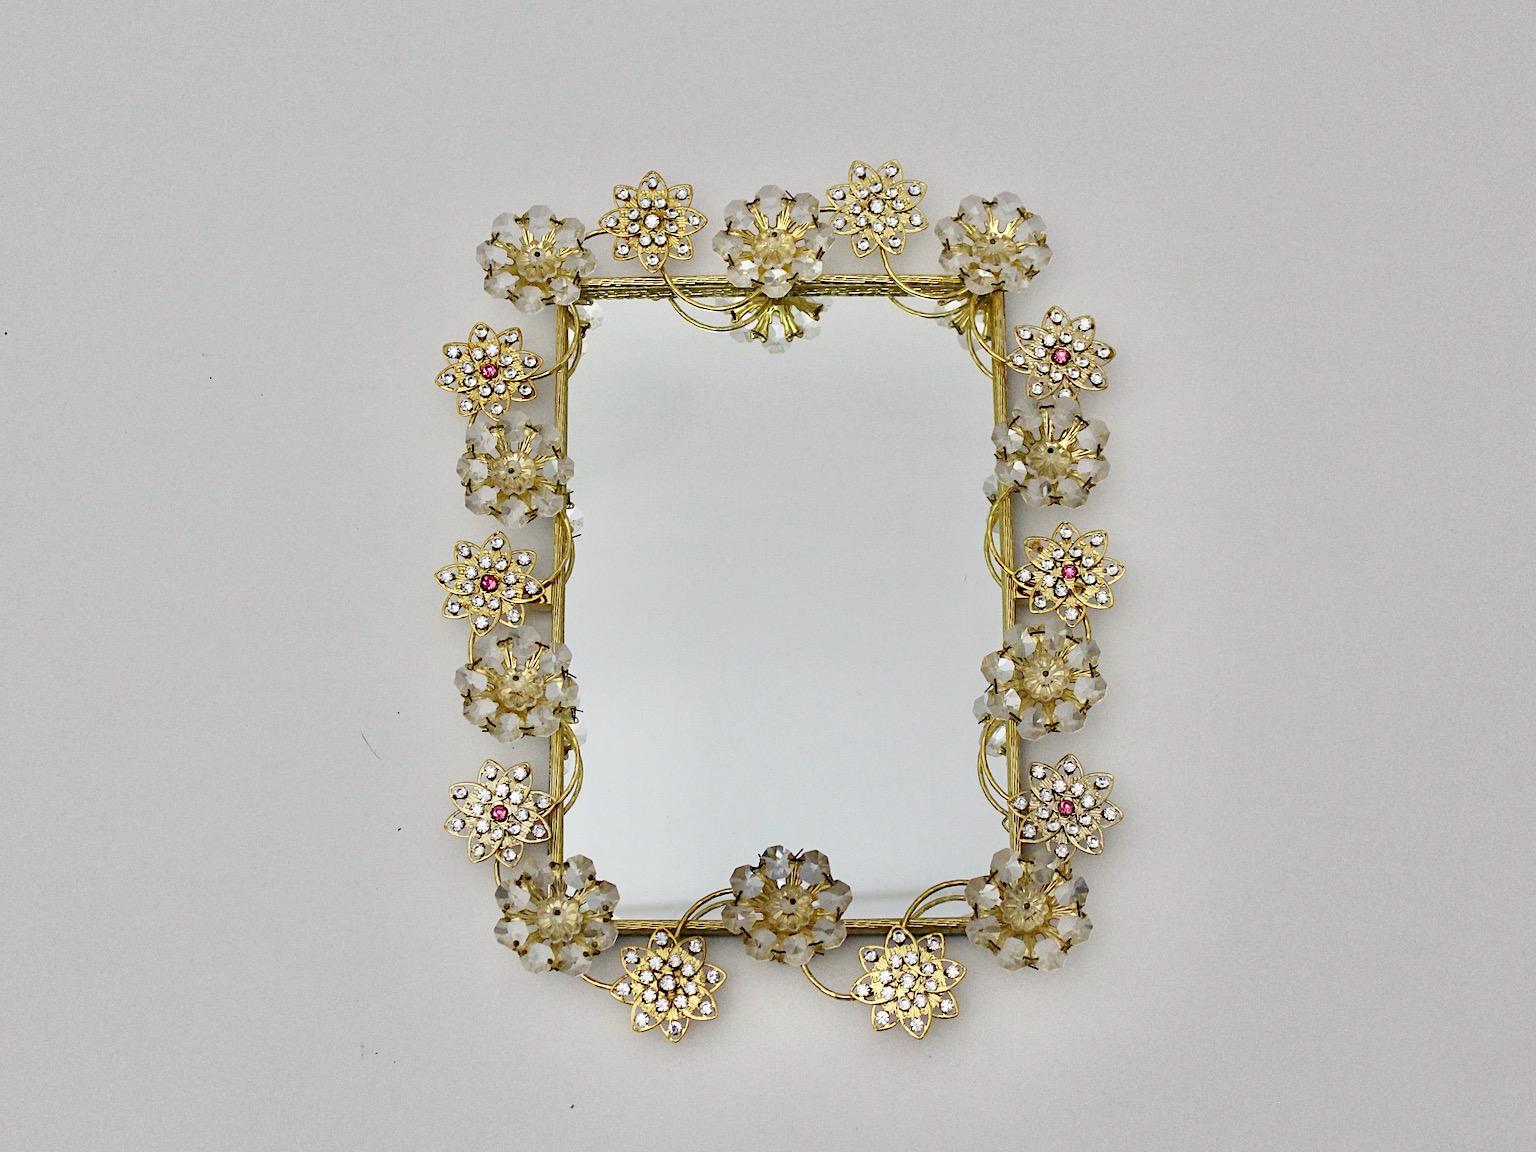 Modern vintage golden metal wall mirror in rectangular shape with glass stones flower and stars like 1990s, Italy.
Charming wall mirror framed with decor, which shows flowers and stars like arranged clear glass stones with few soft pink glass